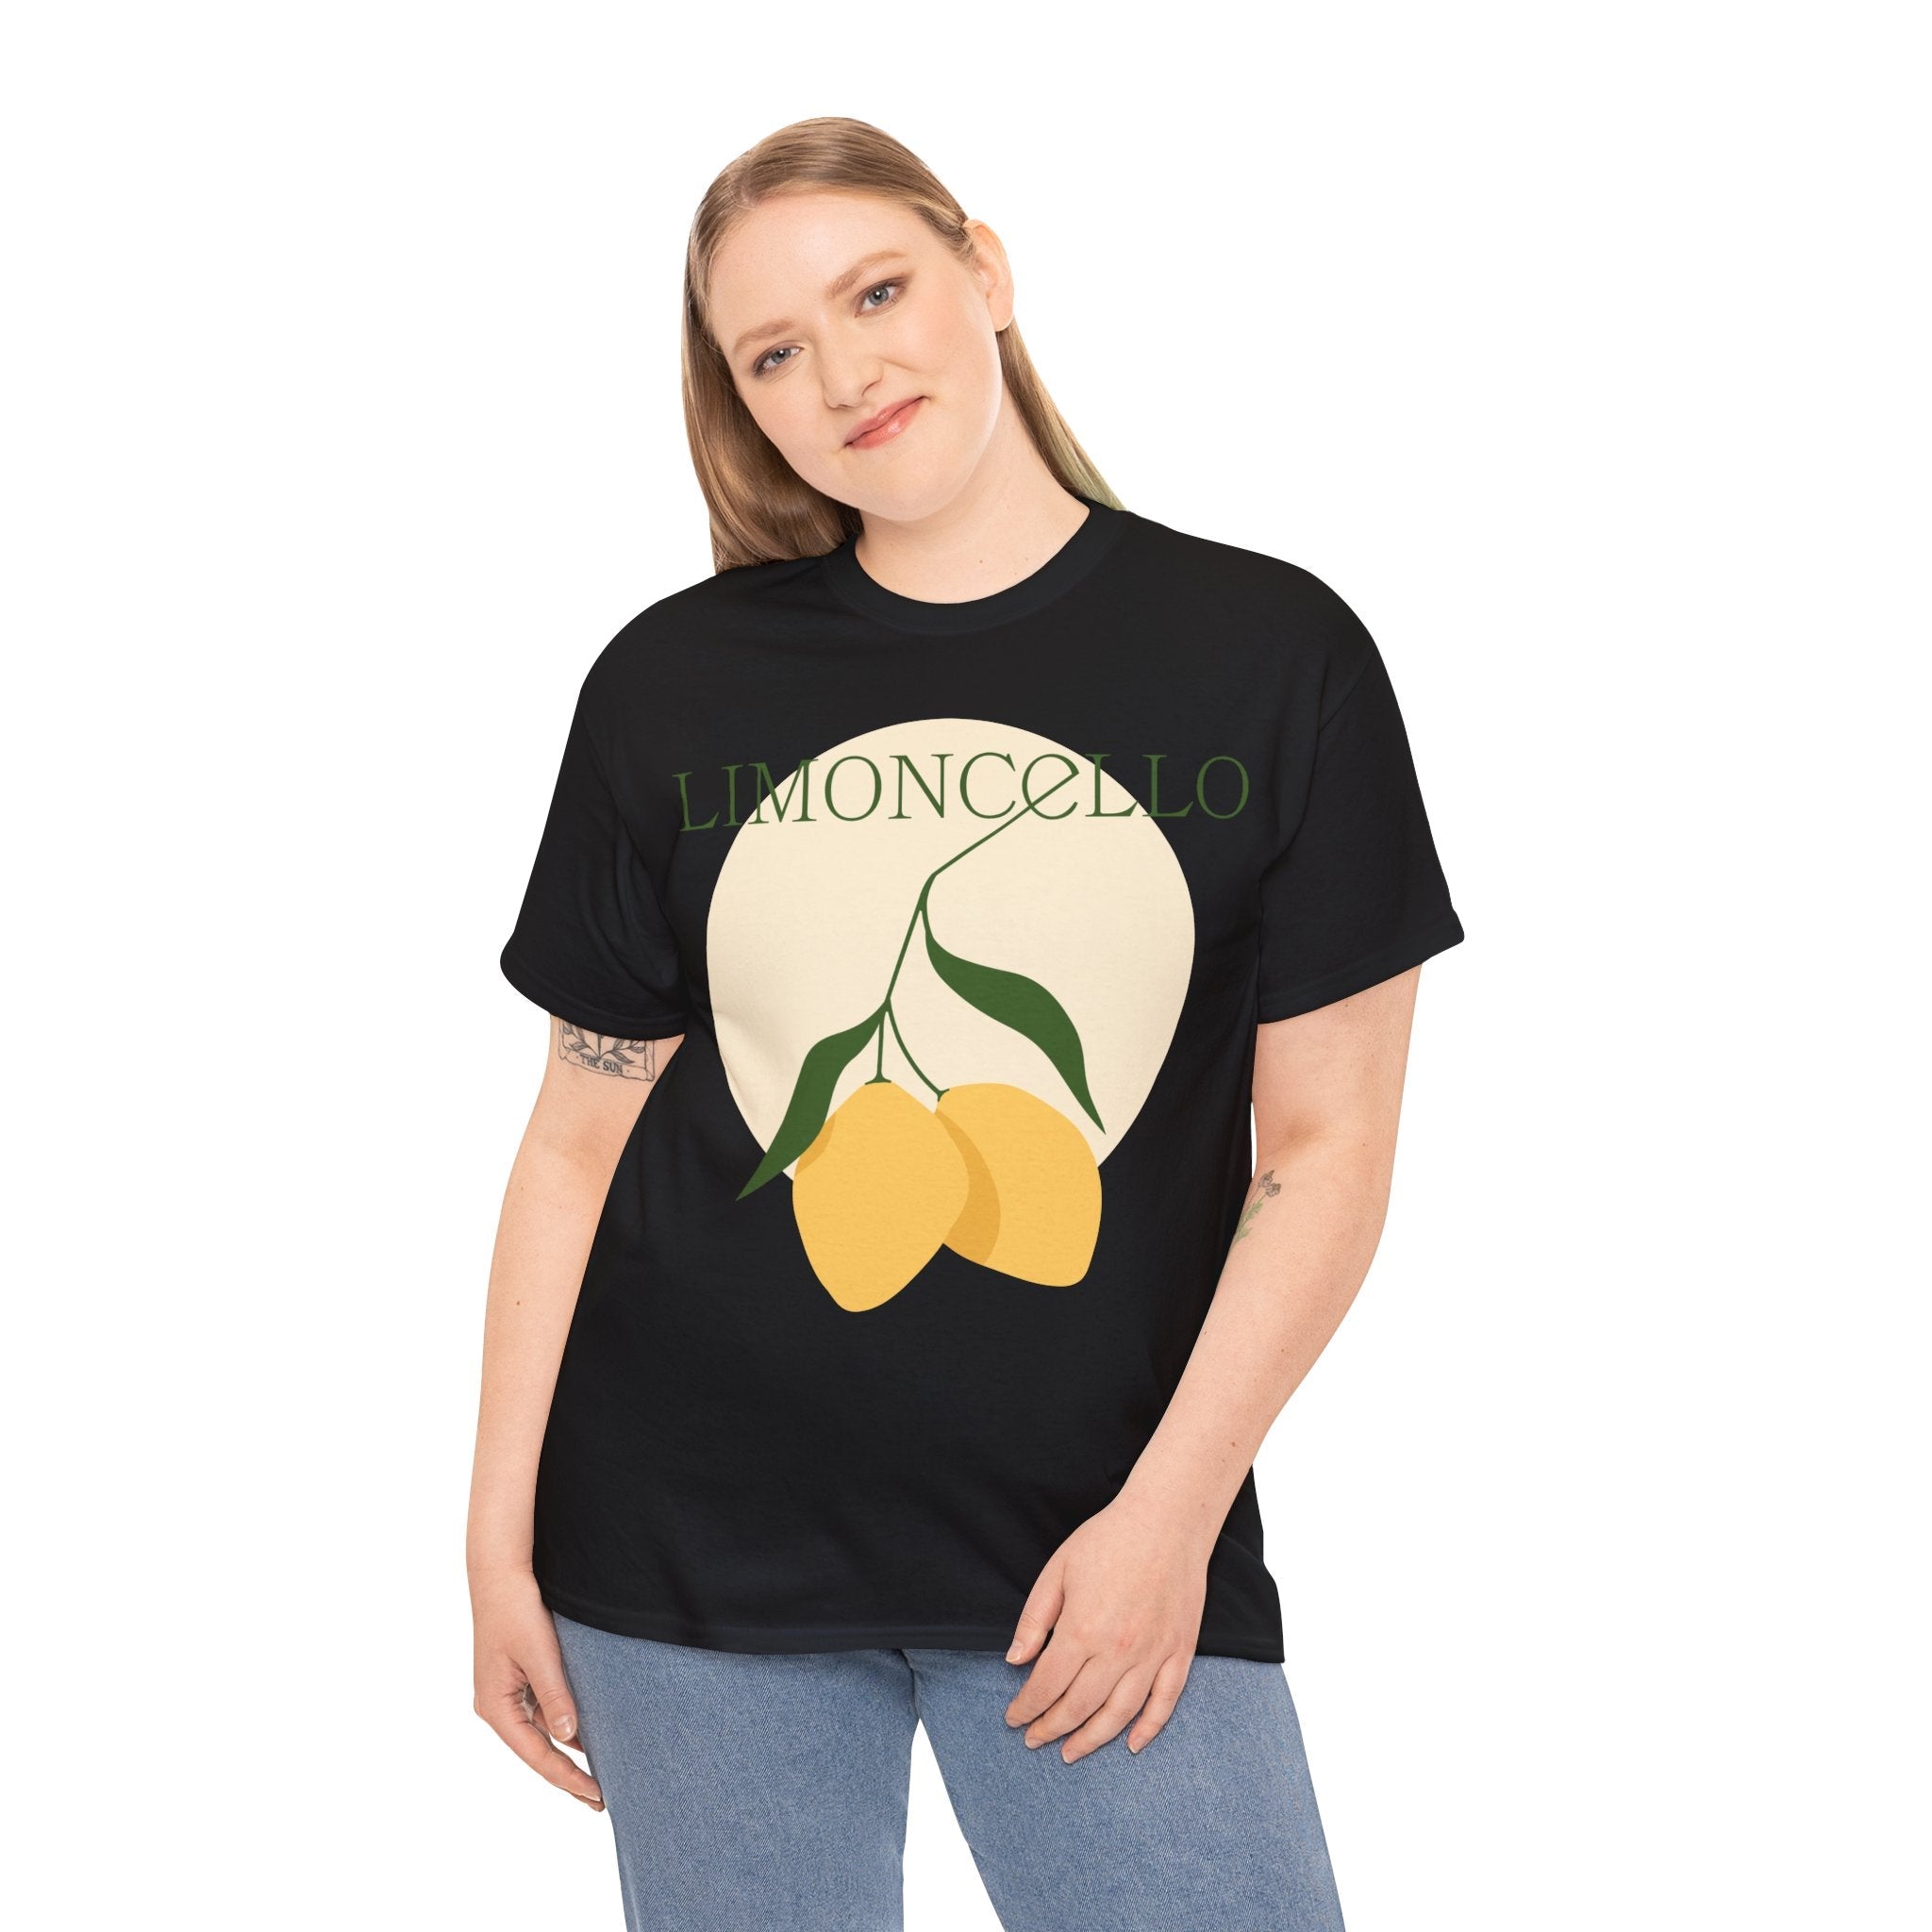 Limoncello T-Shirt: Zesty Style for Citrus Lovers 🍋 - TRU2 Clothing